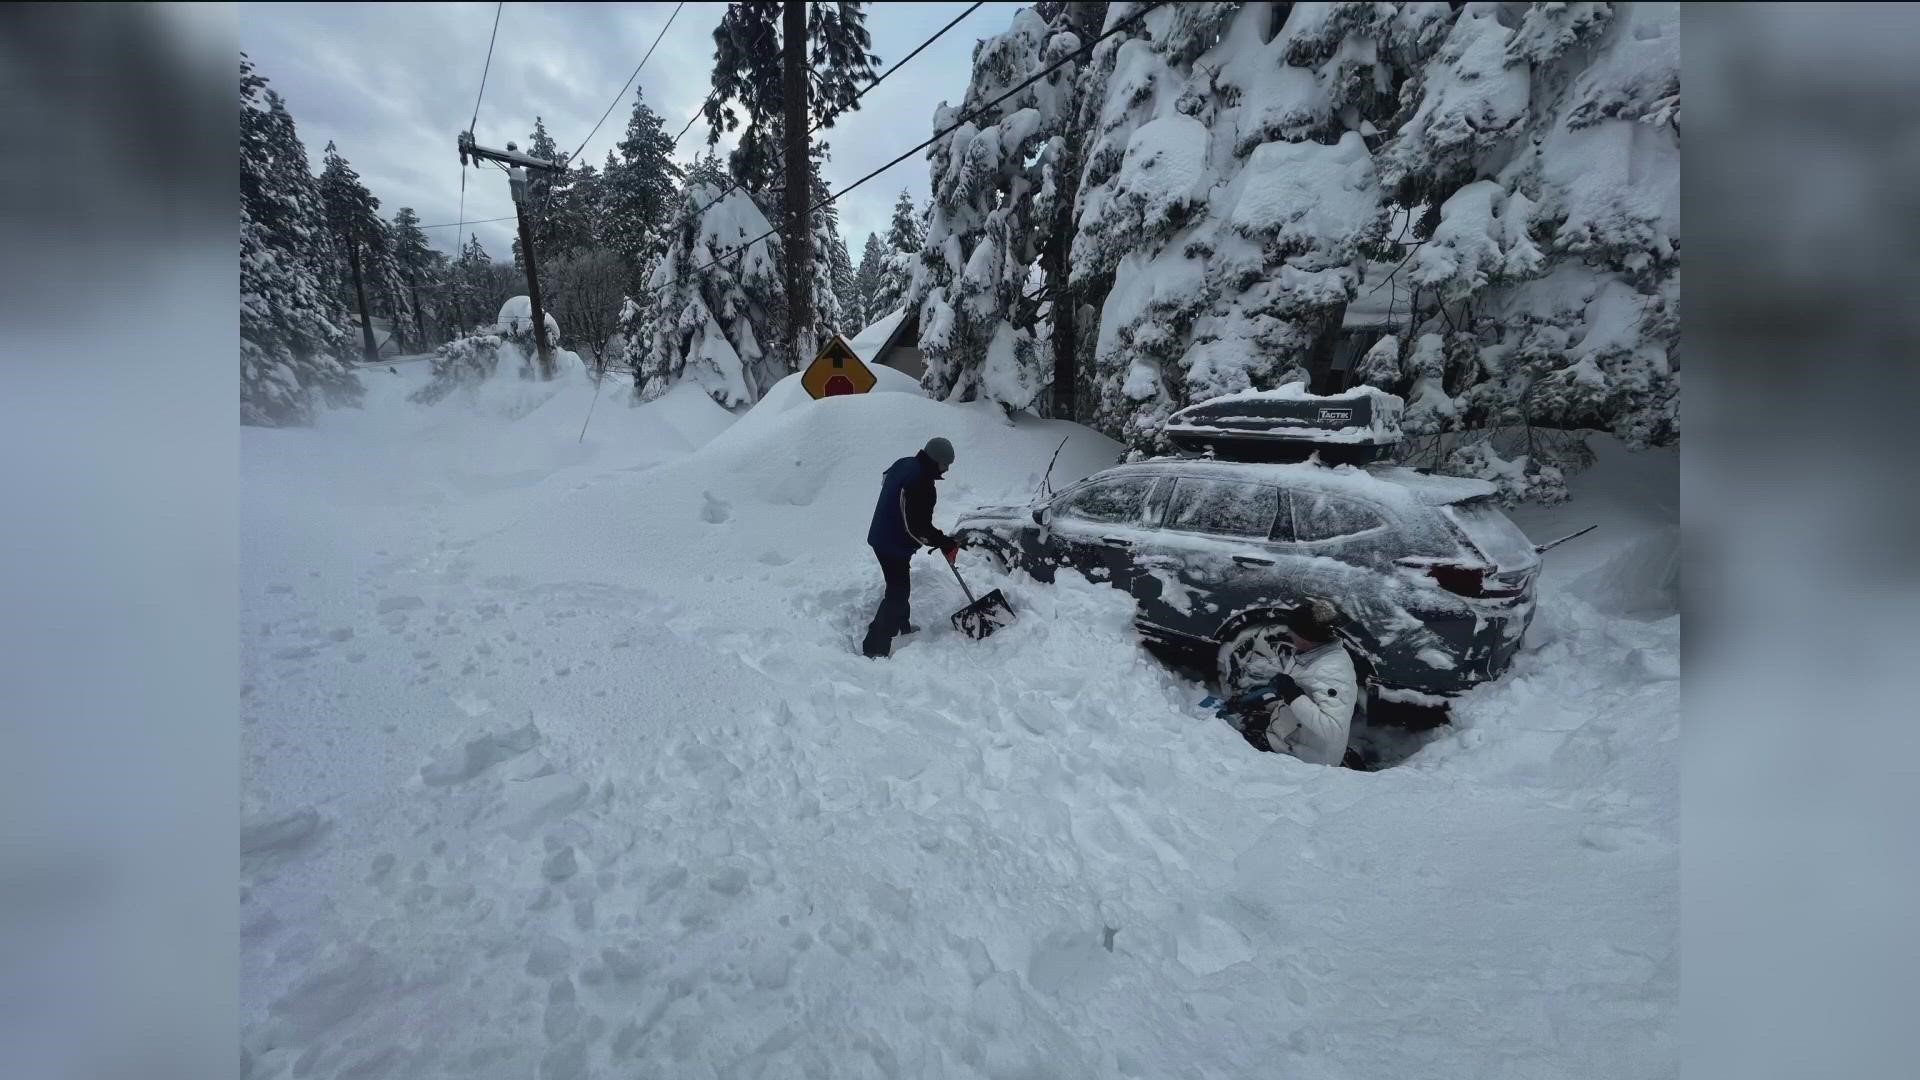 Family was stuck at Lake Arrowhead for 14 days before a snow plow finally arrived to plow the road.